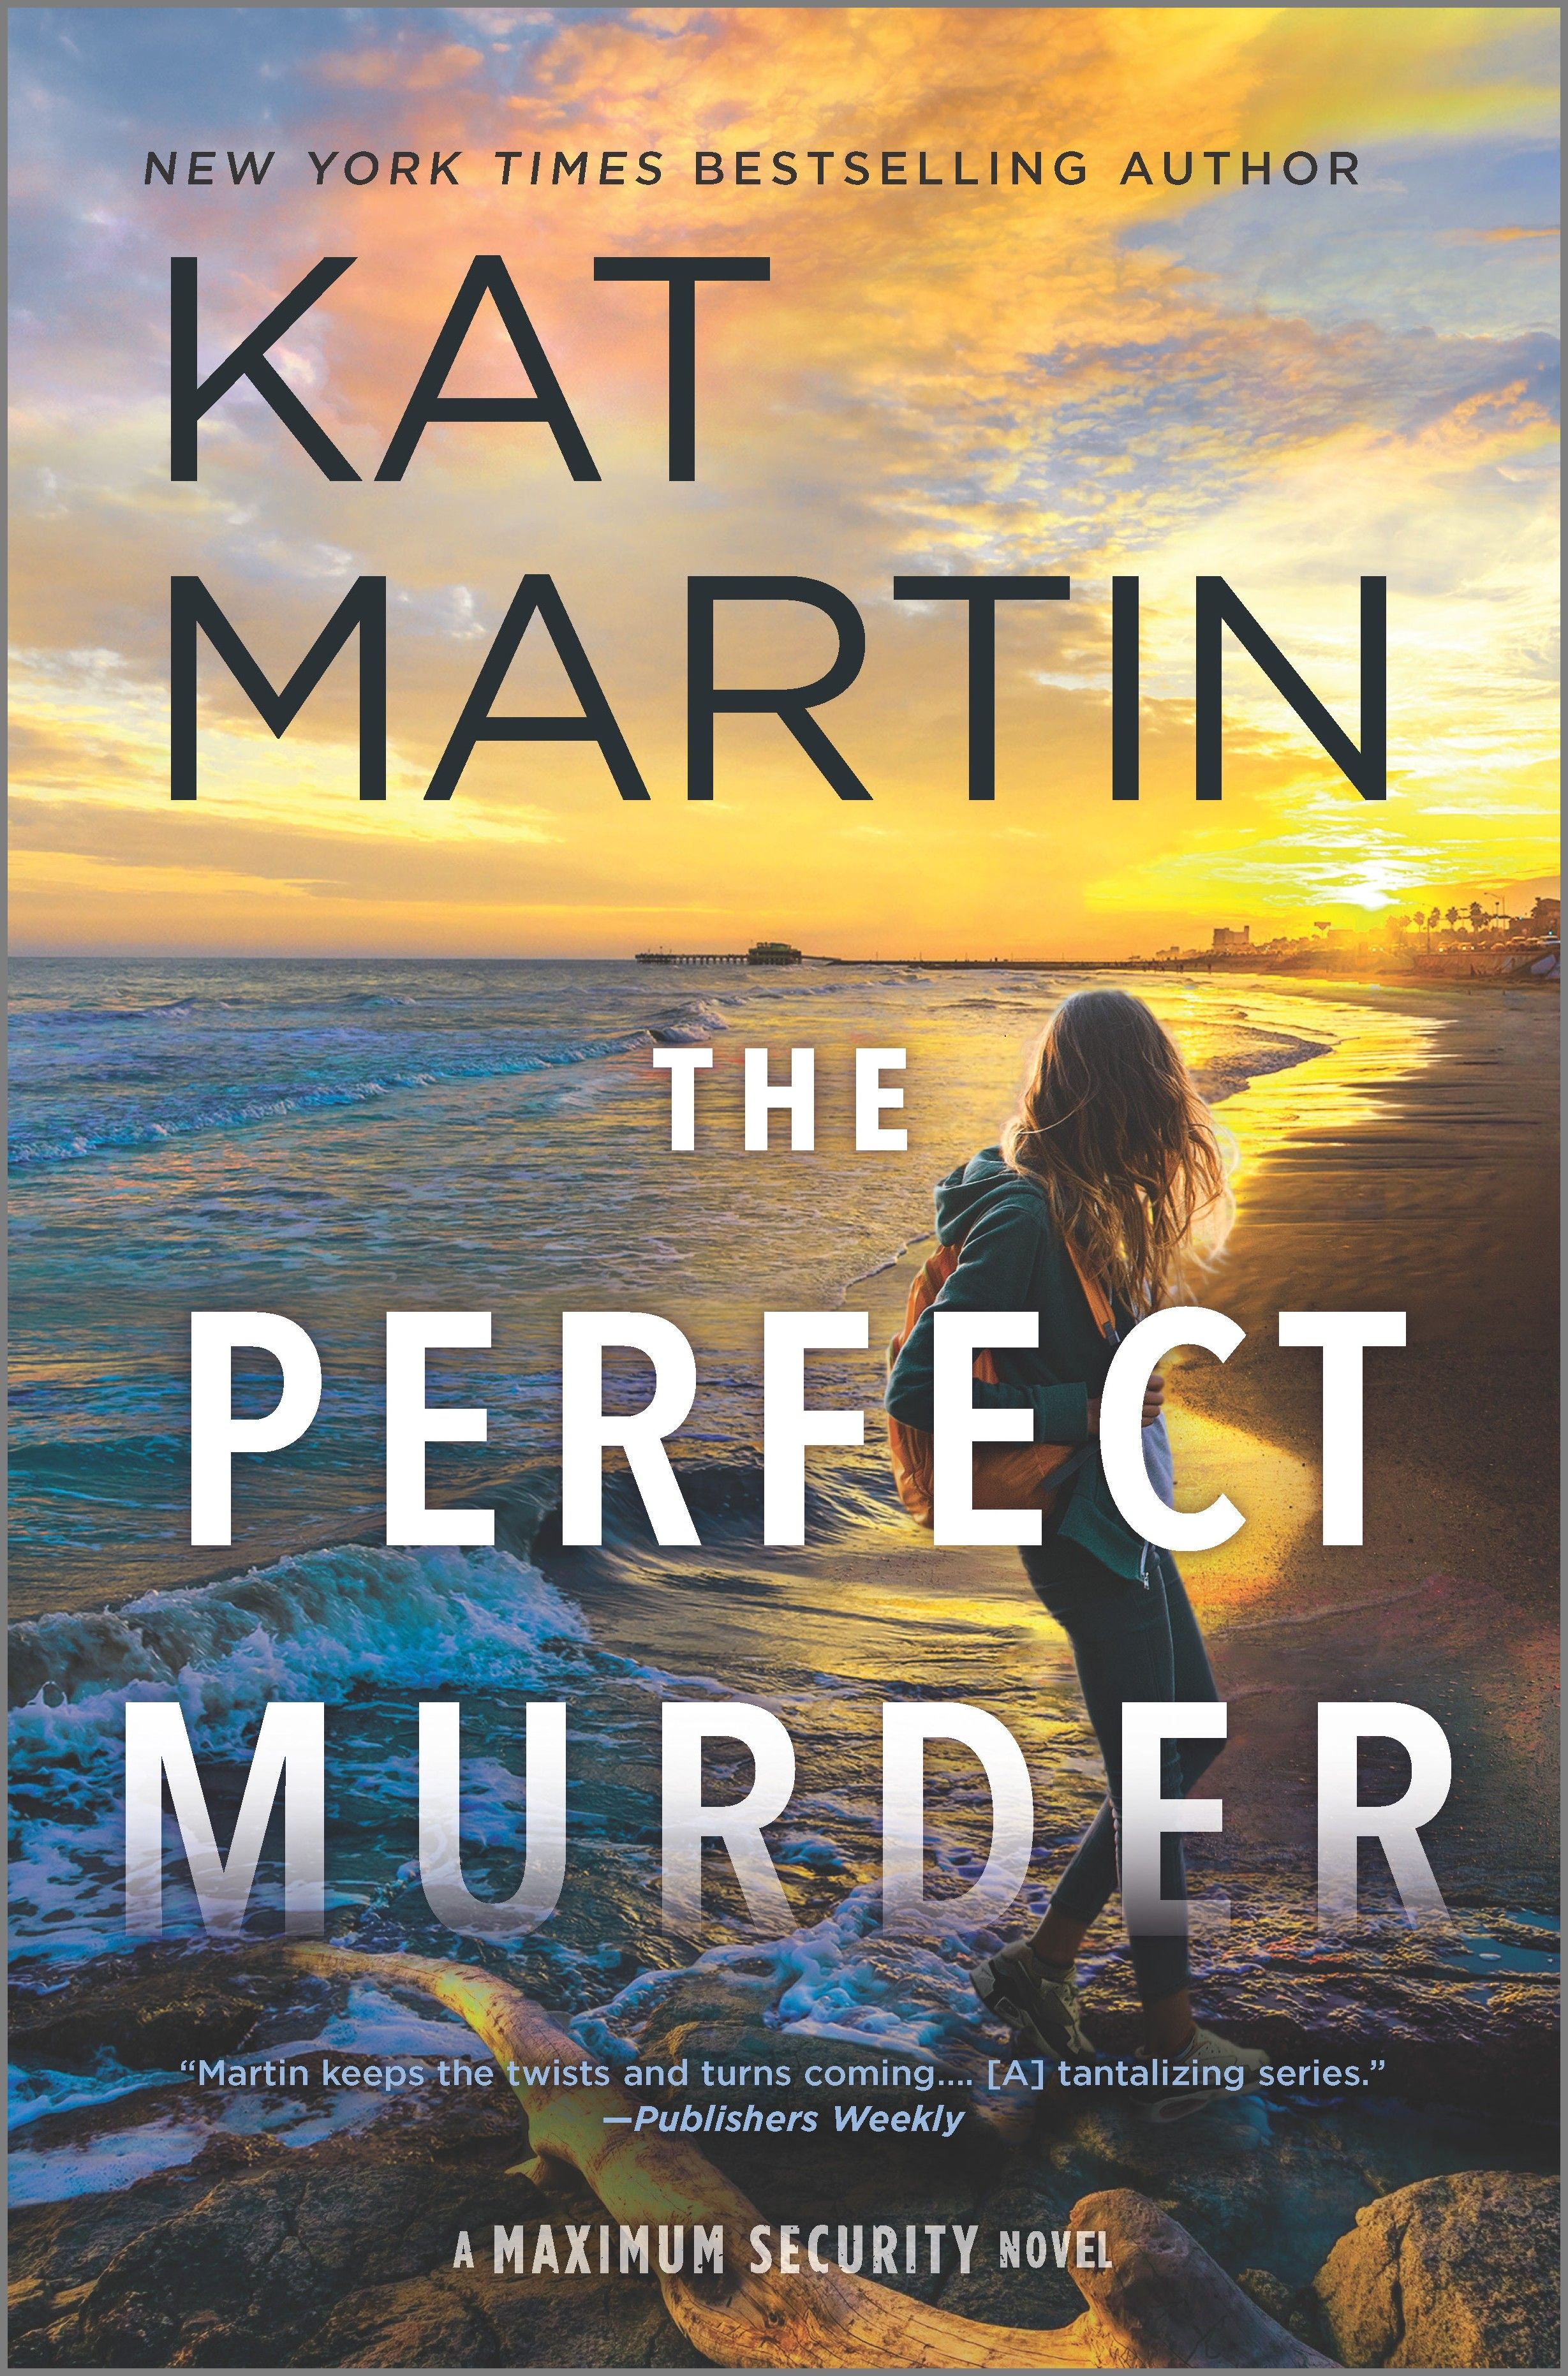 The Perfect Murder by Kat Martin